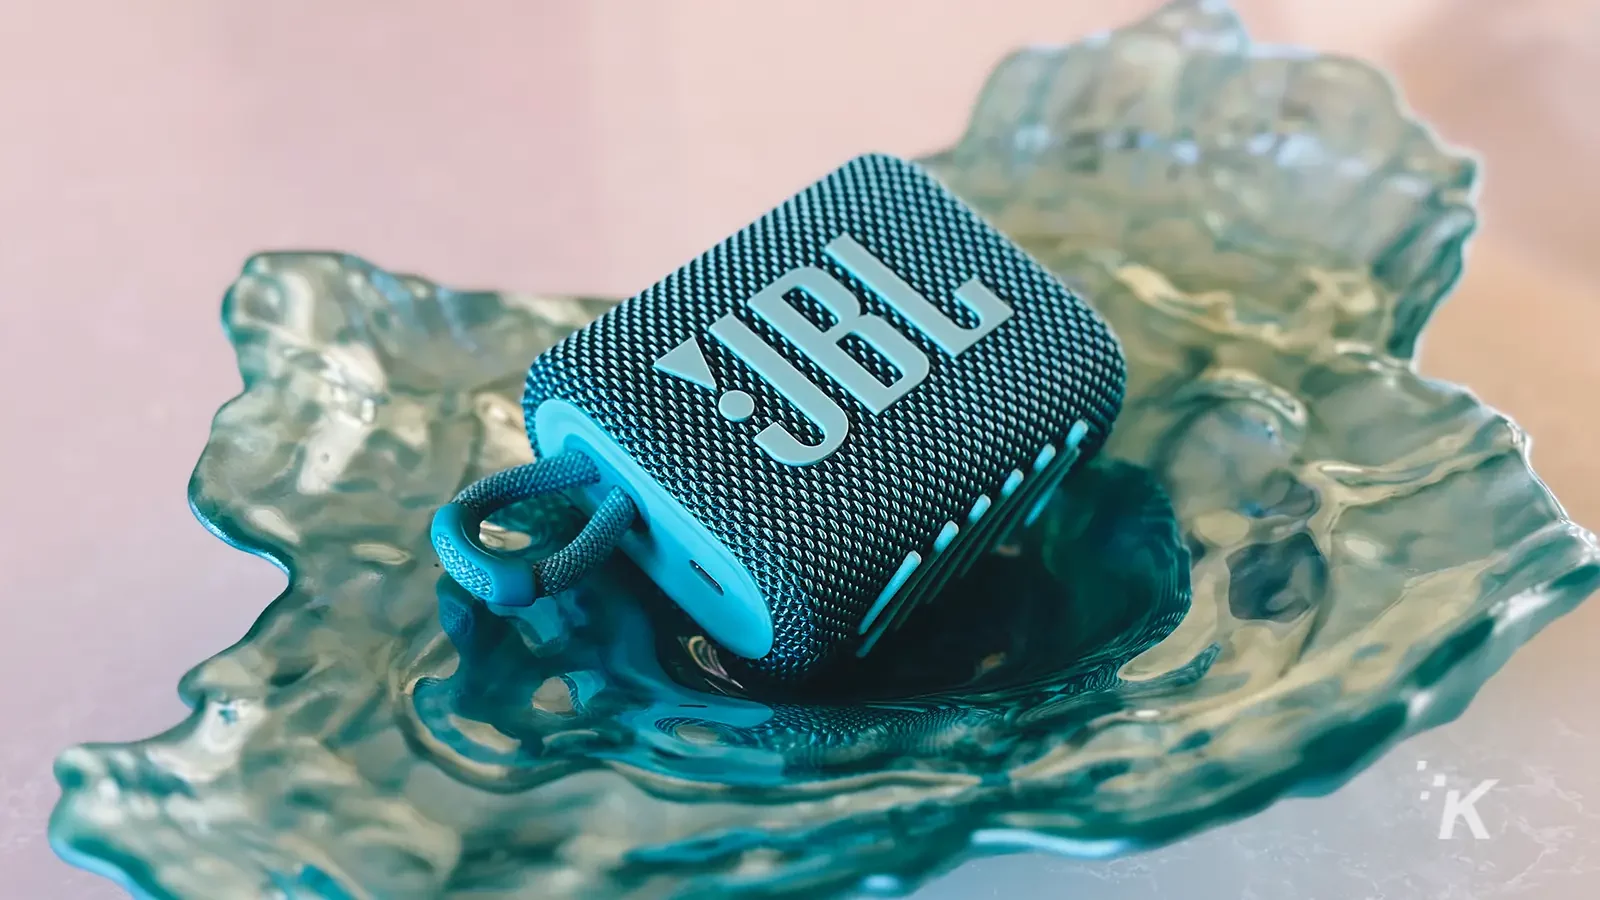 JBL Go 3 portable speaker teal on a tray